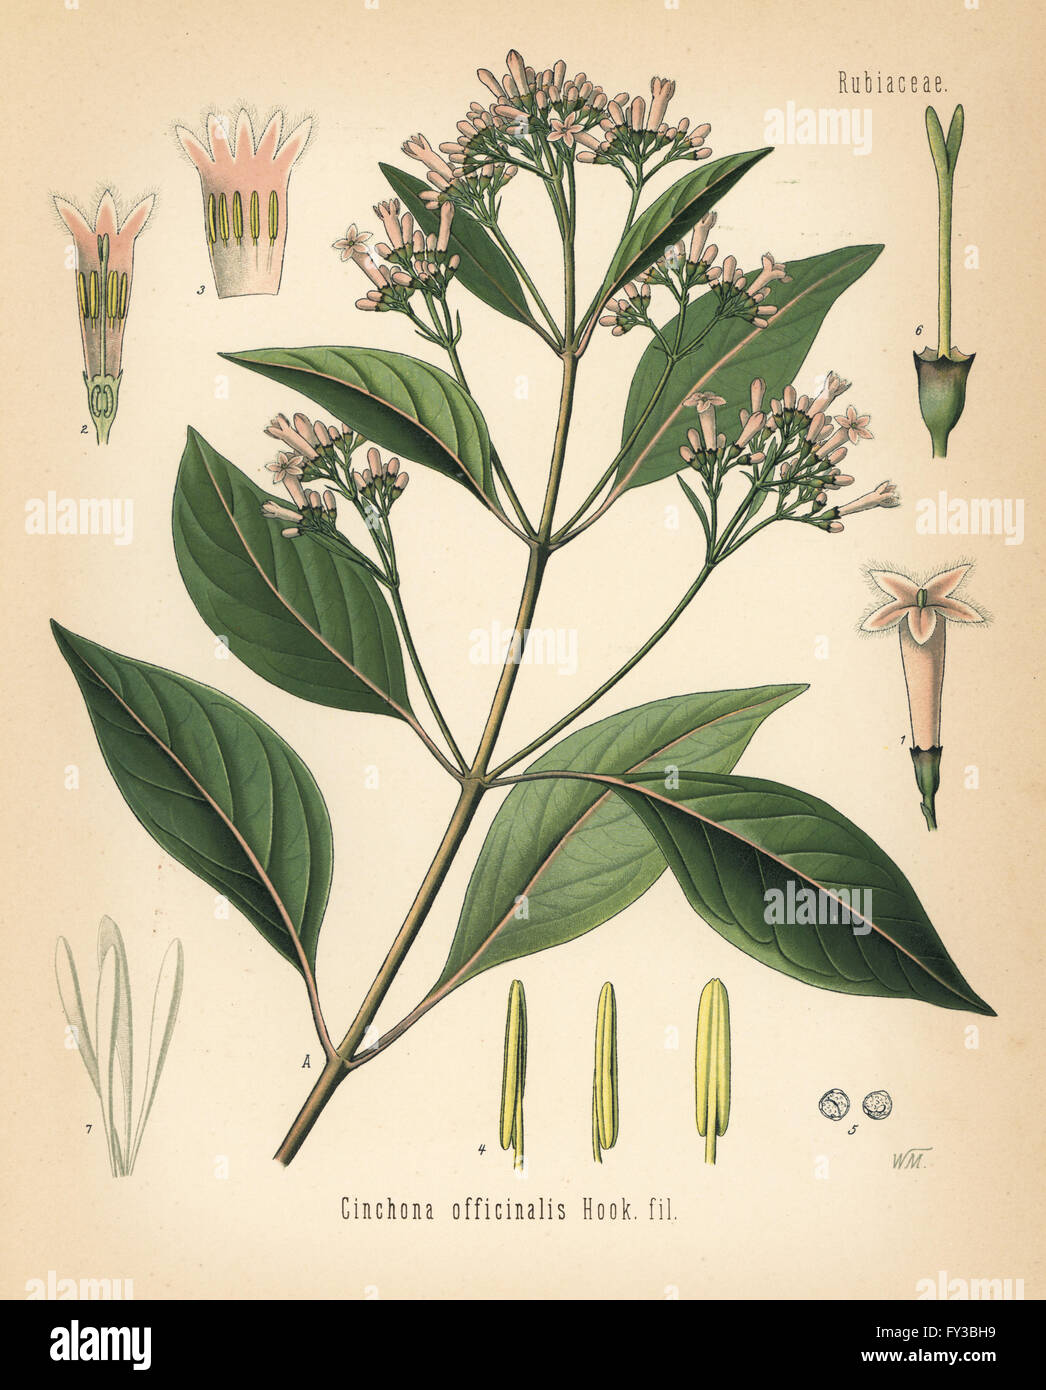 Quinine bark tree, Cinchona officinalis. Chromolithograph after a botanical illustration by Walther Muller from Hermann Adolph Koehler's Medicinal Plants, edited by Gustav Pabst, Koehler, Germany, 1887. Stock Photo